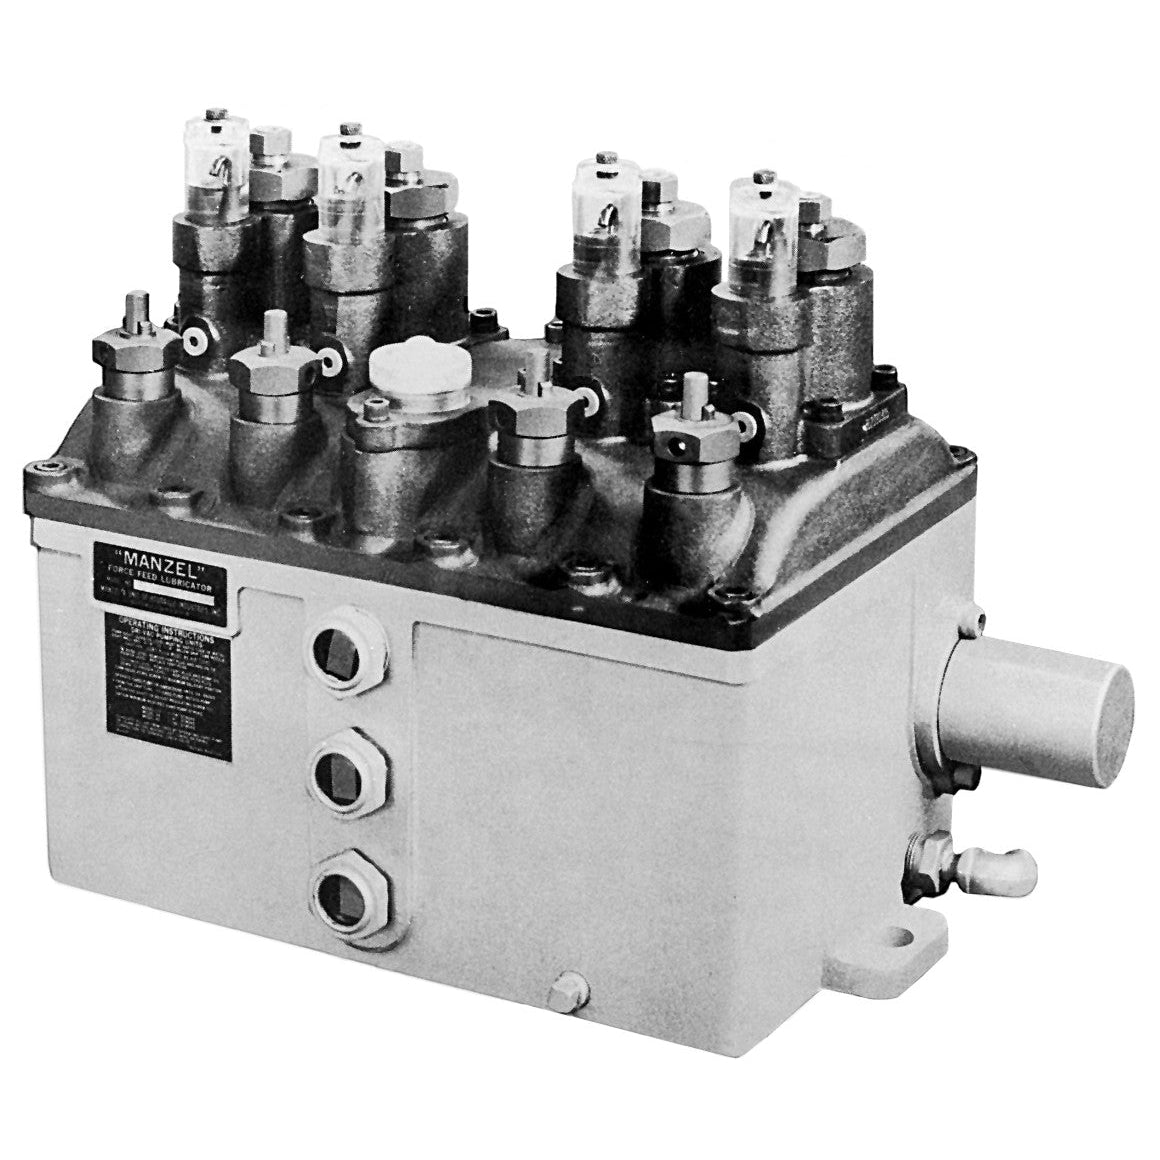 HP-50 Lubricator with 4 Pumps